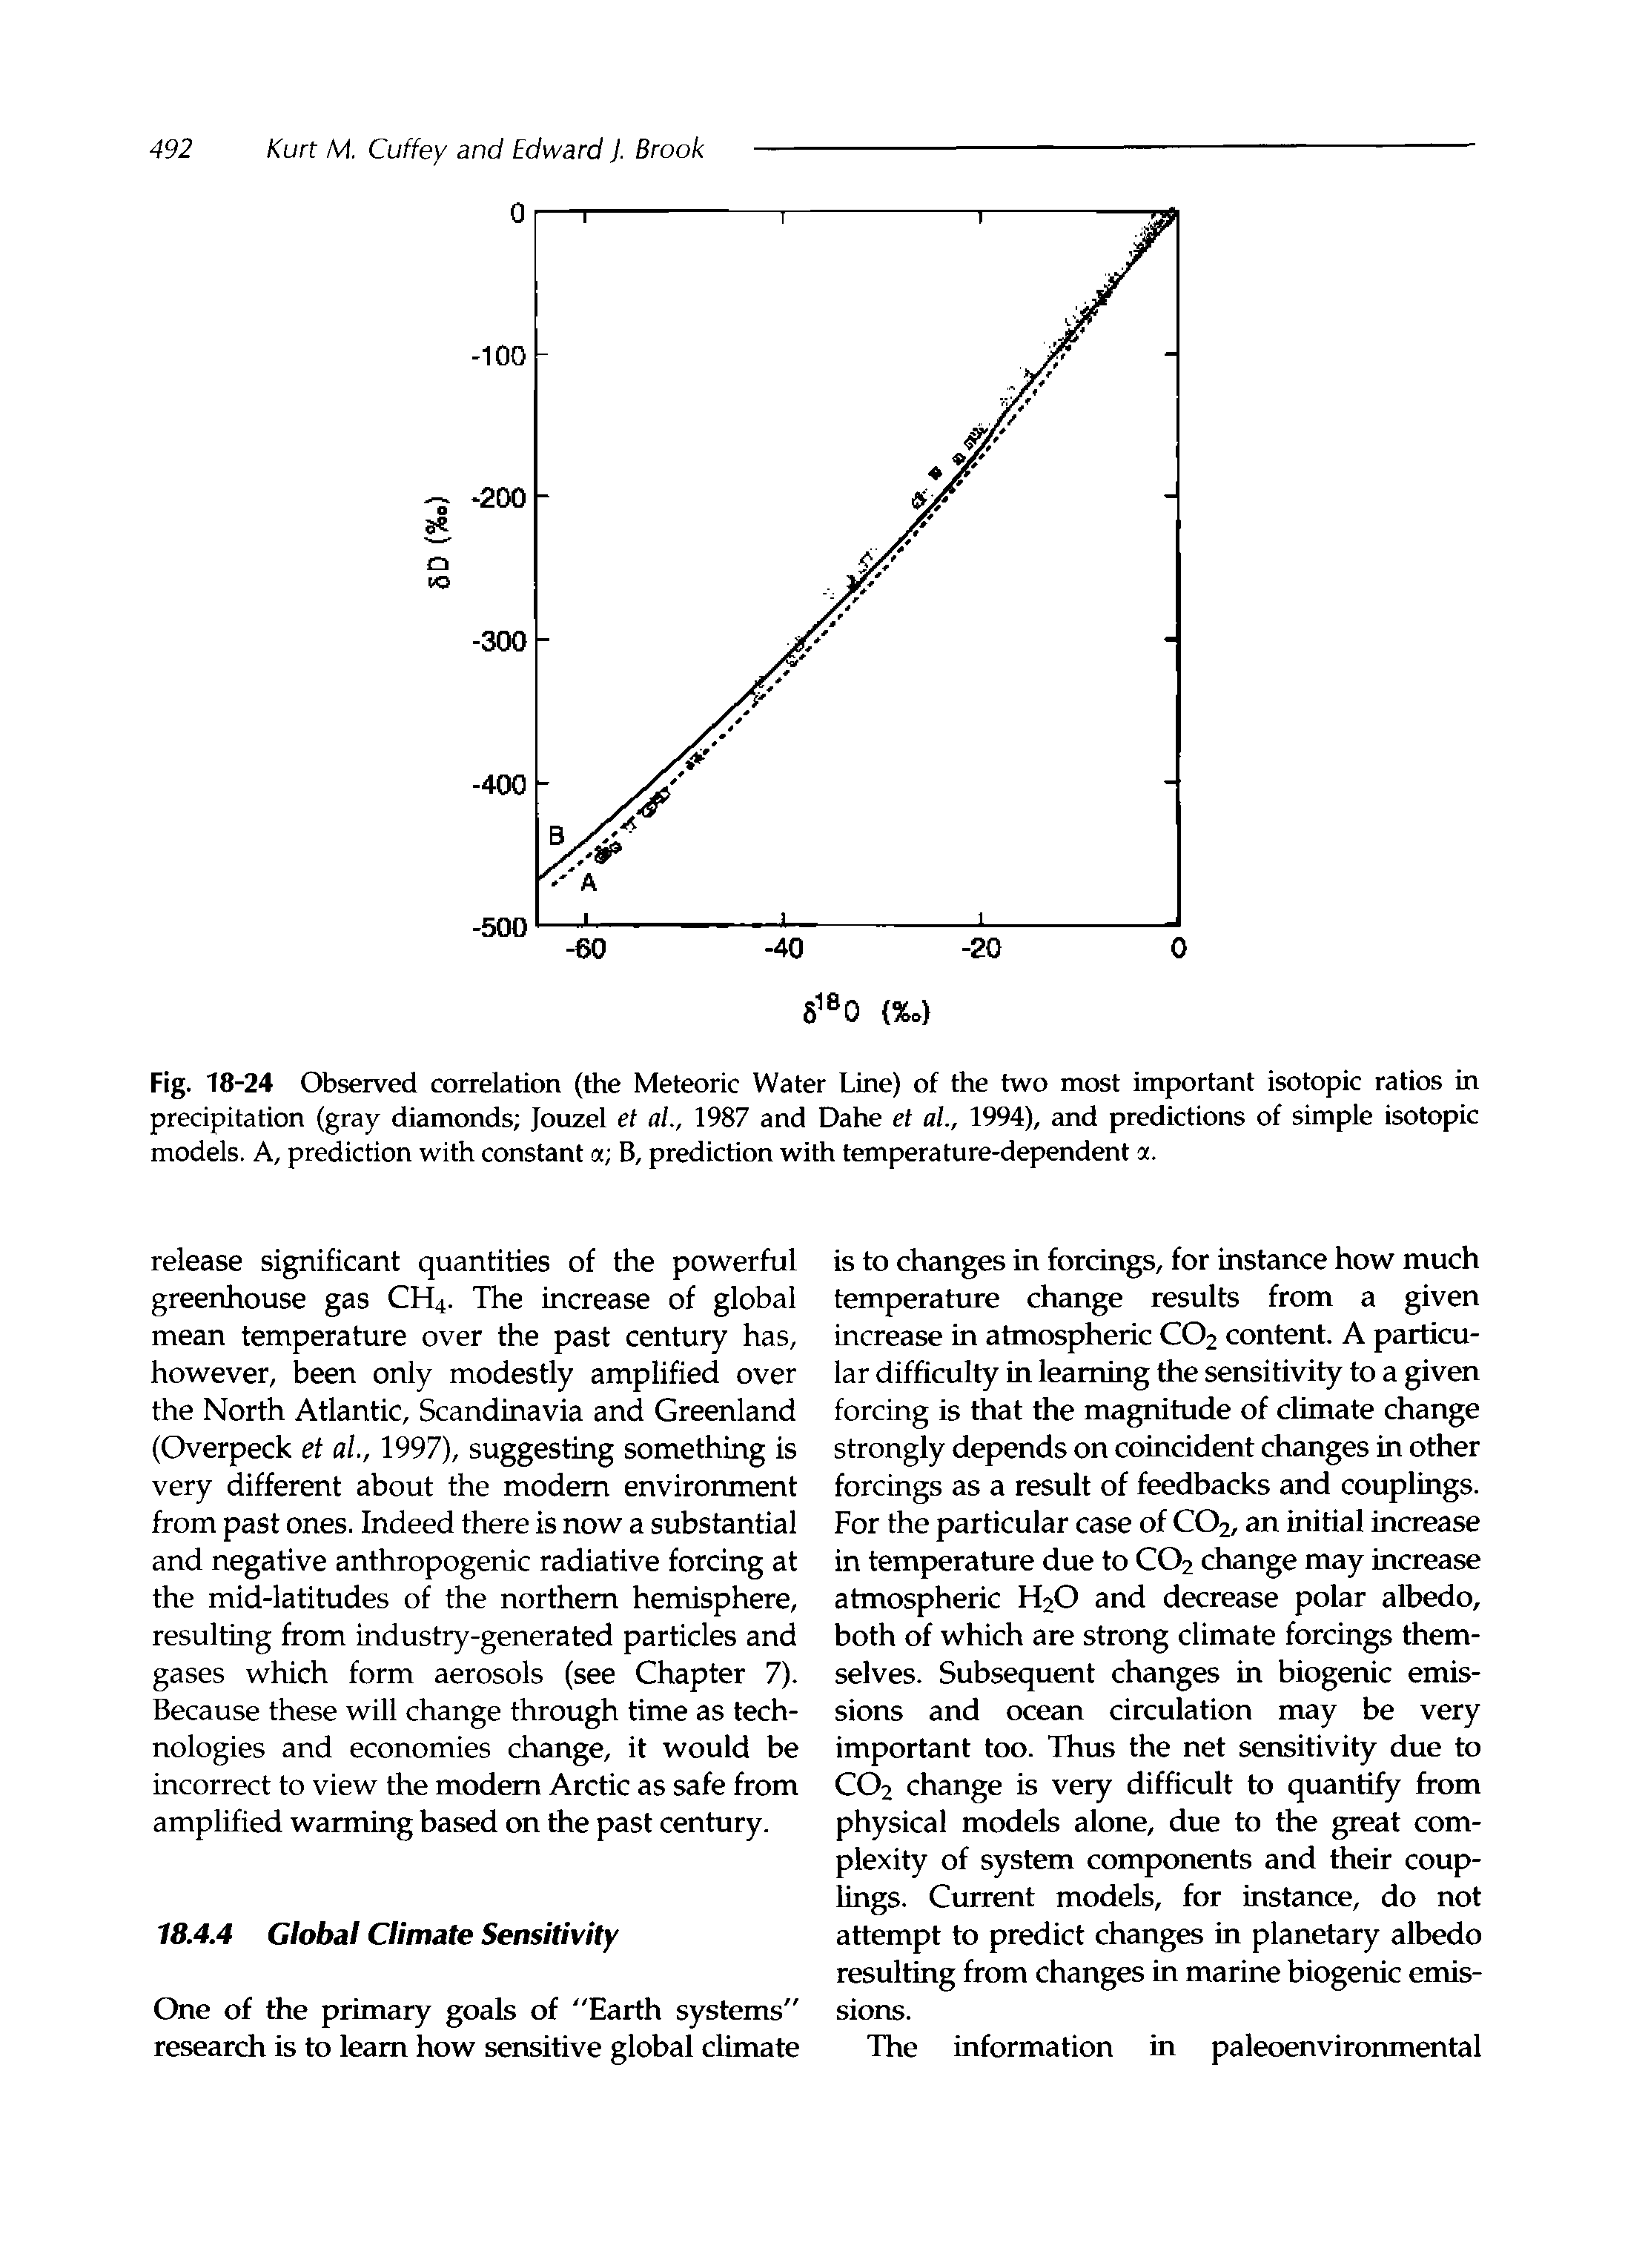 Fig. 18-24 Observed correlation (the Meteoric Water Line) of the two most important isotopic ratios in precipitation (gray diamonds Jouzel et al., 1987 and Dahe et al., 1994), and predictions of simple isotopic models. A, prediction with constant a B, prediction with temperature-dependent a.